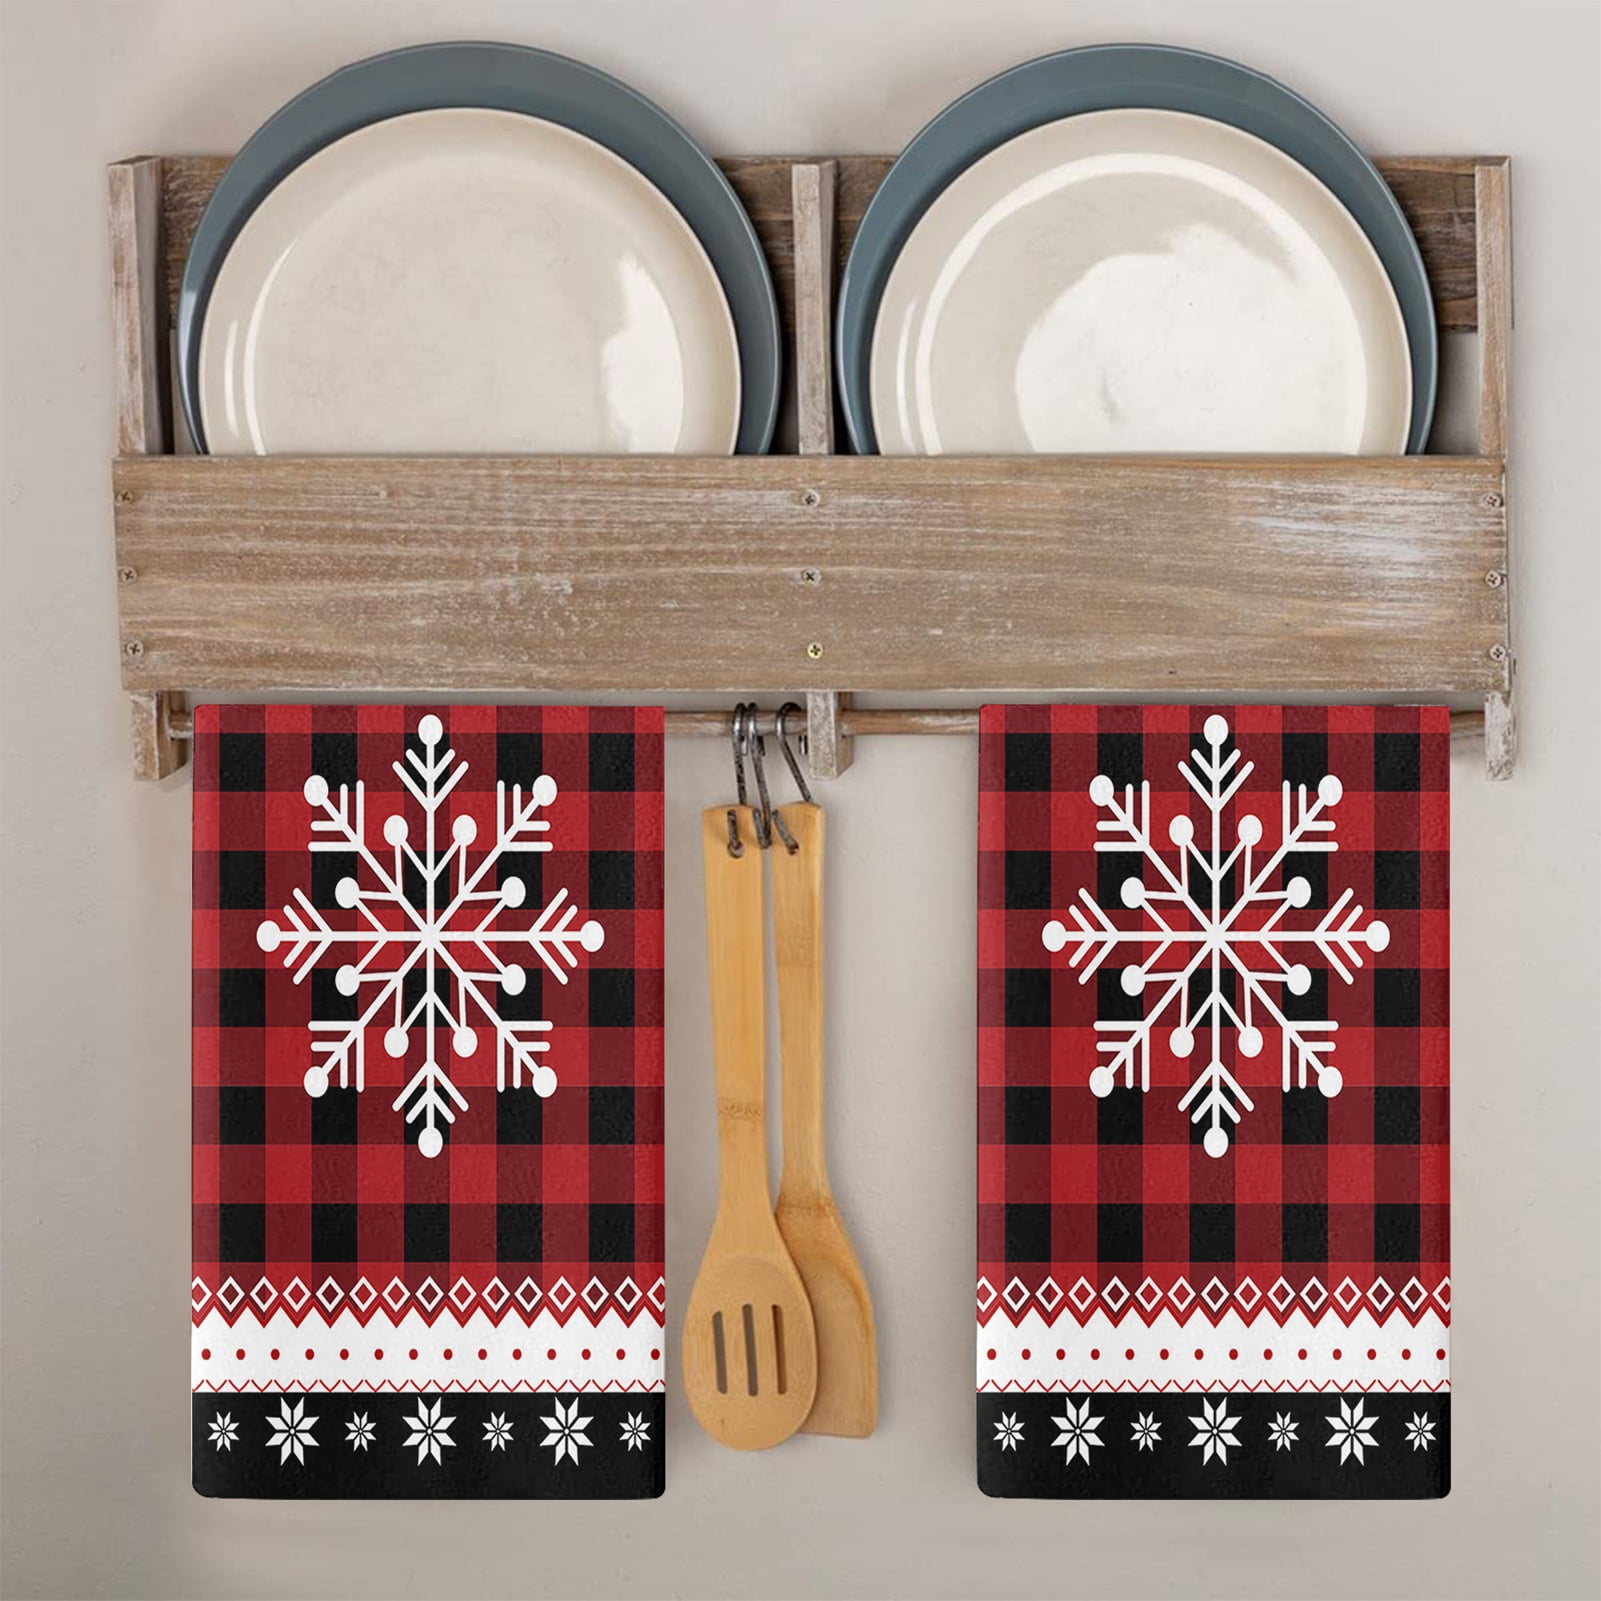 NWT Set of 4 Christmas Kitchen Towels 2 Red Black Plaid/2 Solid Red  Holidays